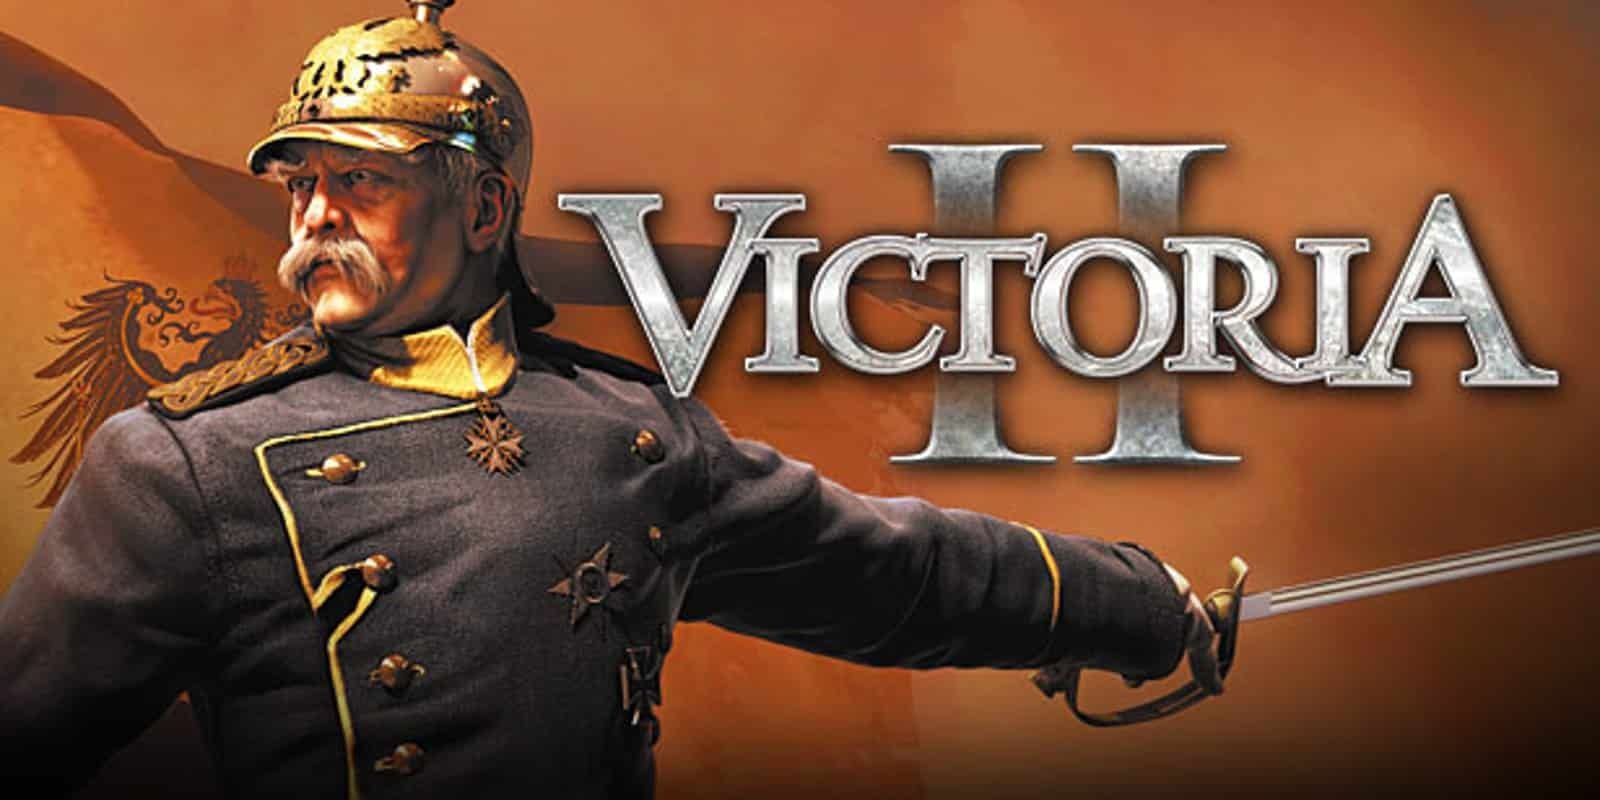 Man holding out a saber beside the logo of Victoria 2